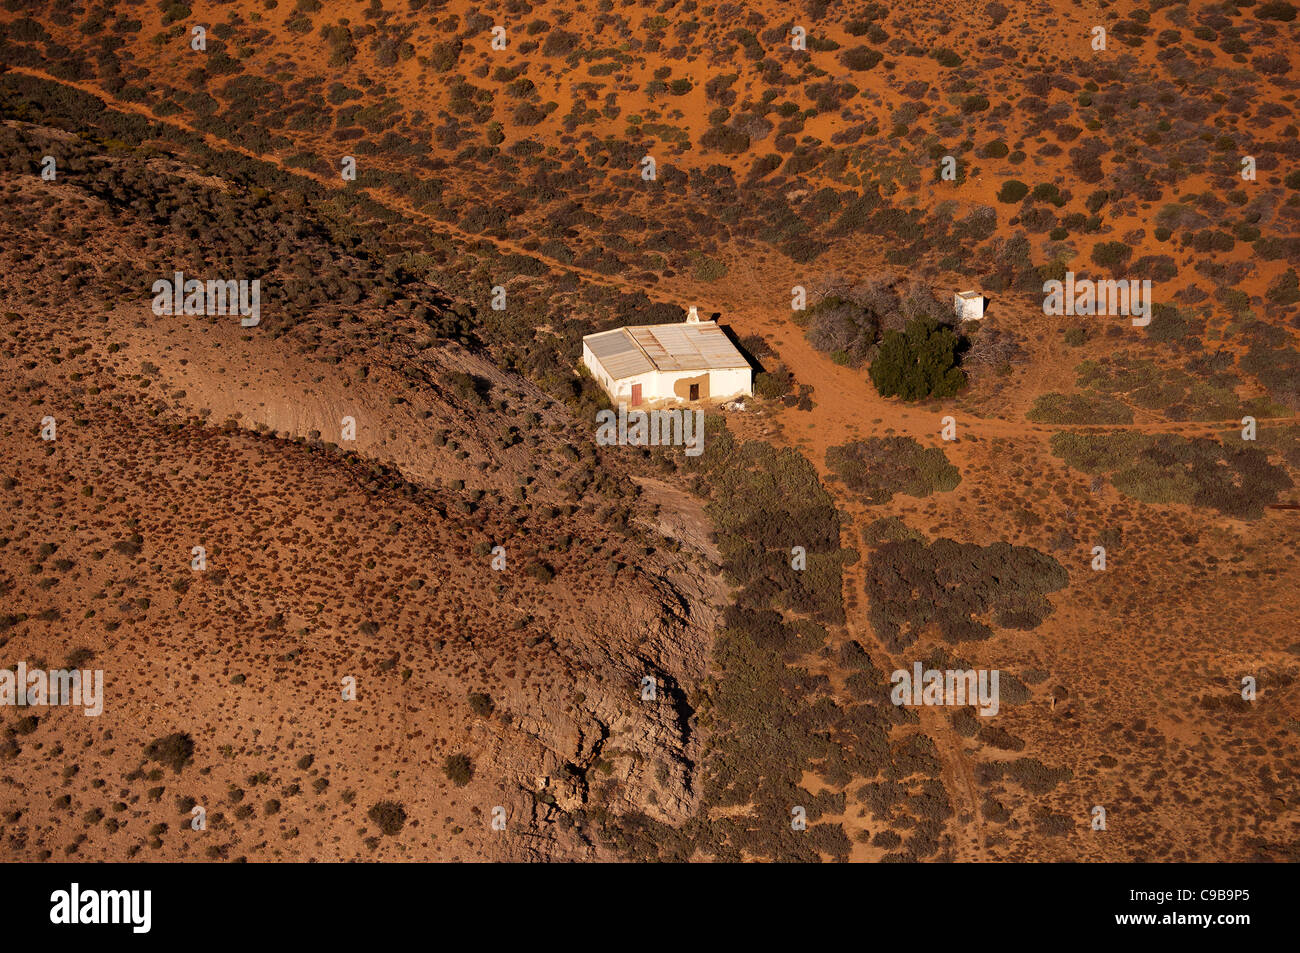 Bird's eye view of a small farm house taken in the remote arid Namaqualand region of South Africa, situated on the West Coast. Stock Photo